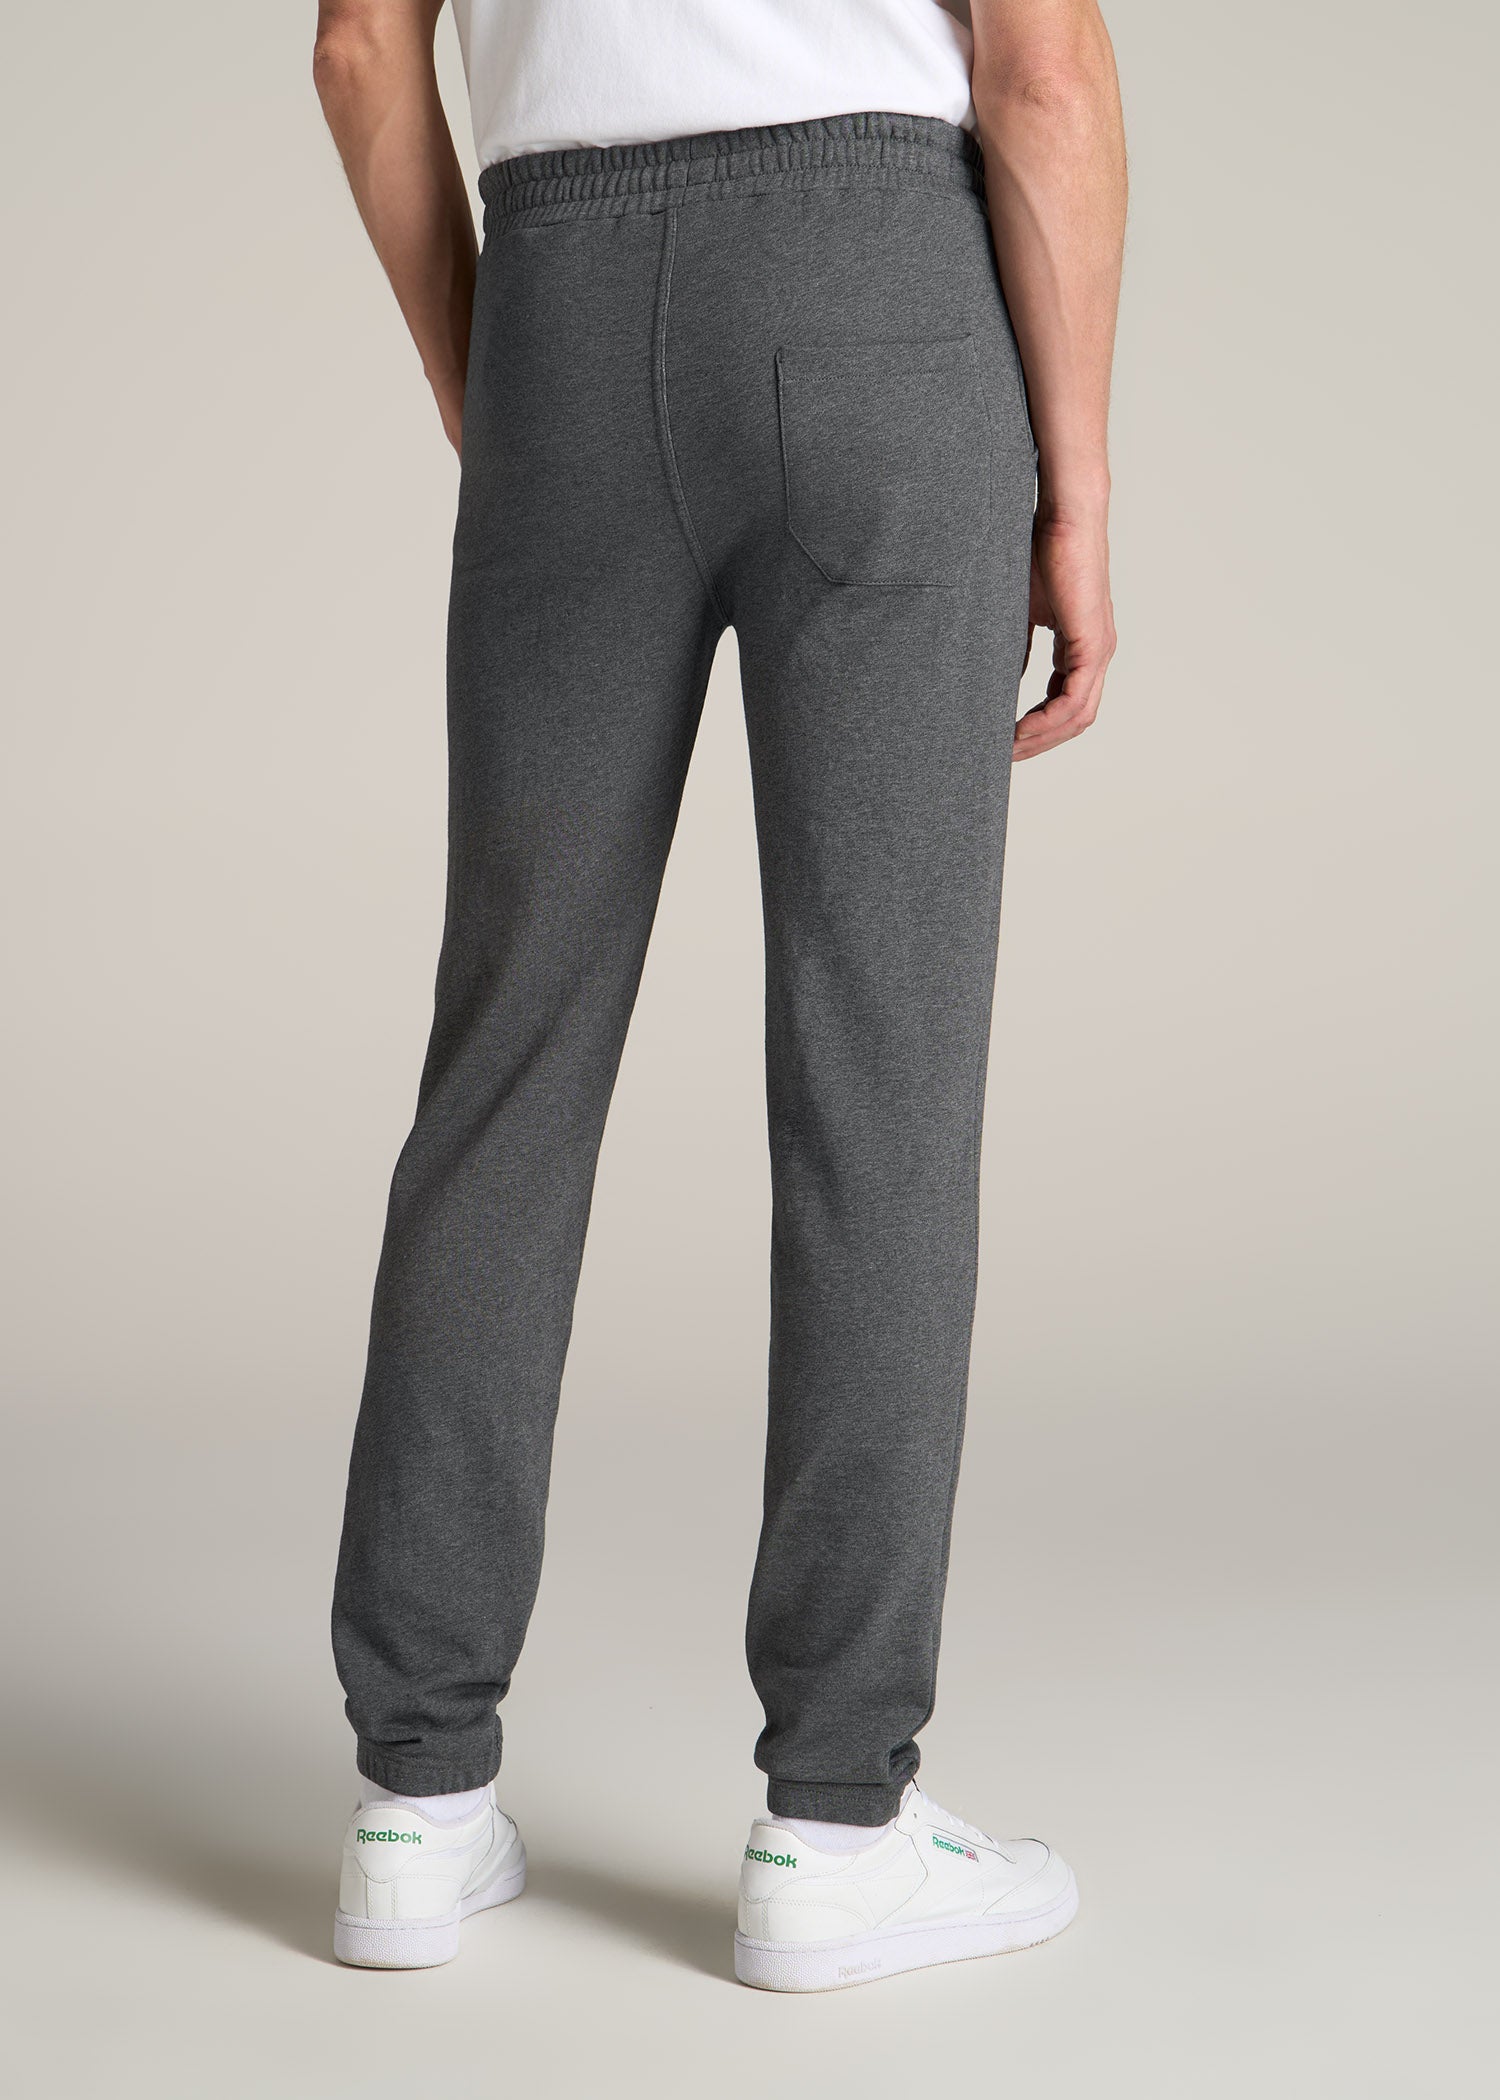 American-Tall-Men-Wearever-French-Terry-Sweatpants-Men-Charcoal-Mix-back